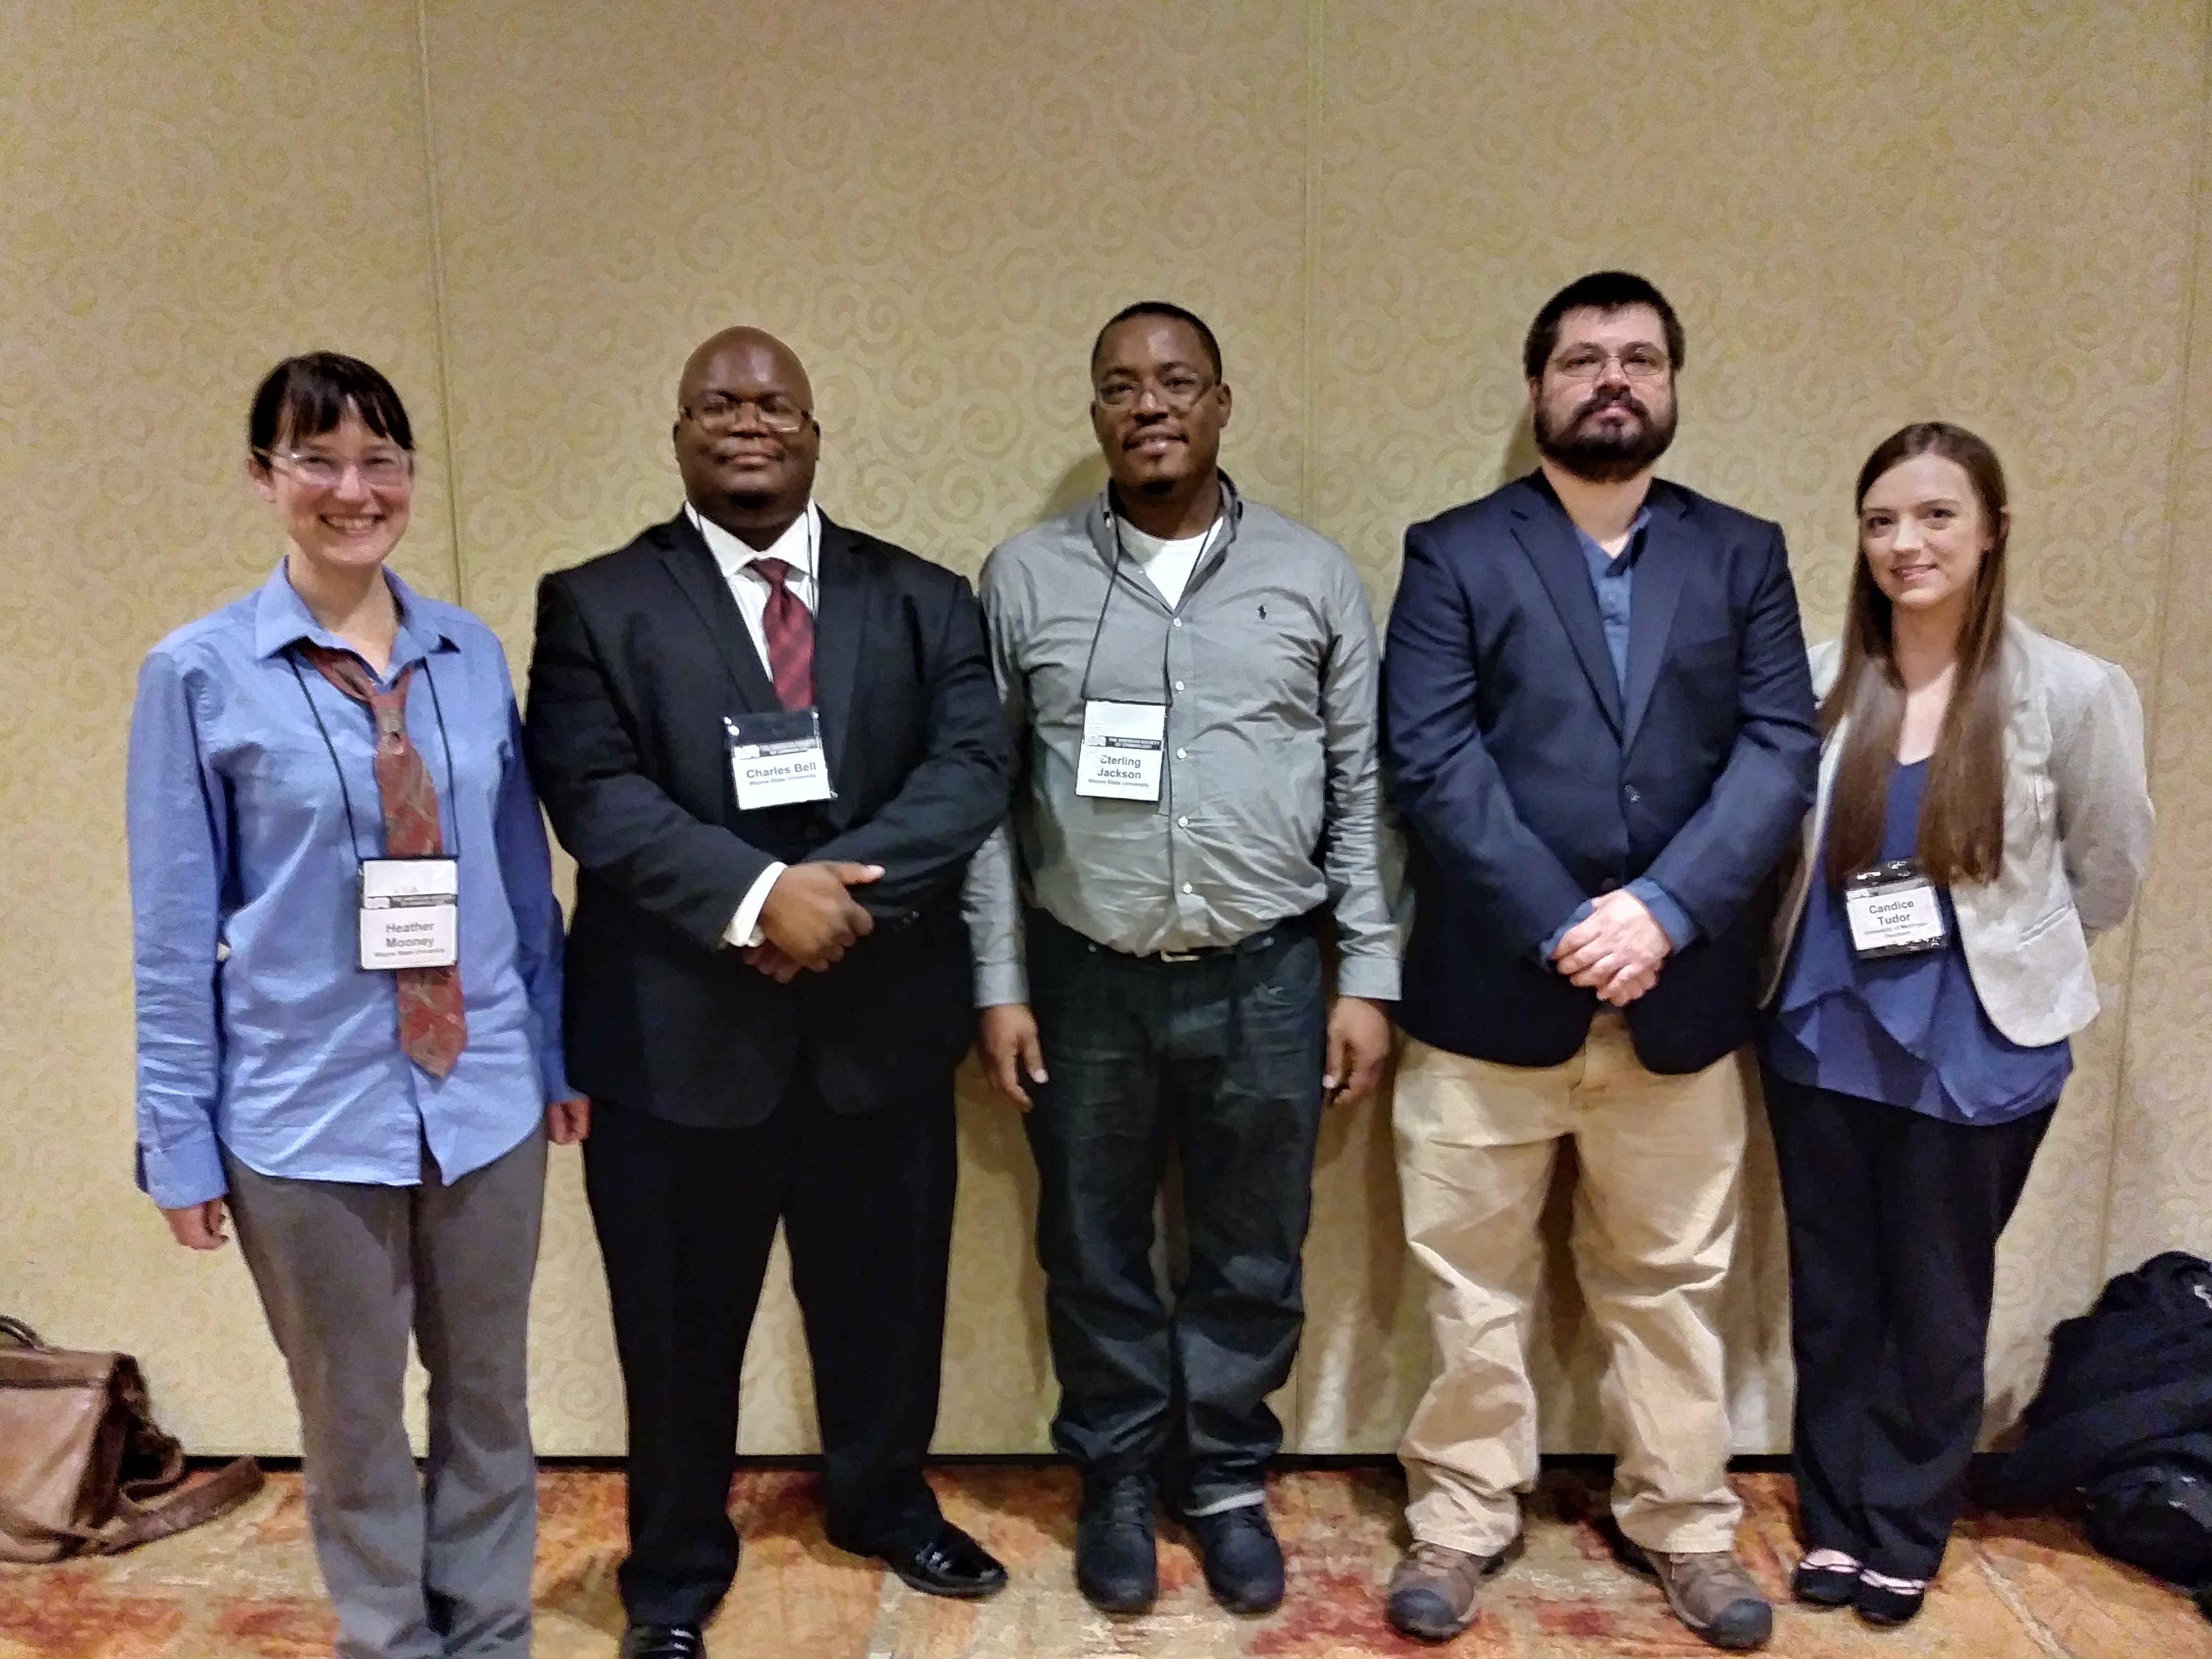 AGEP Scholar organizes panel at national conference